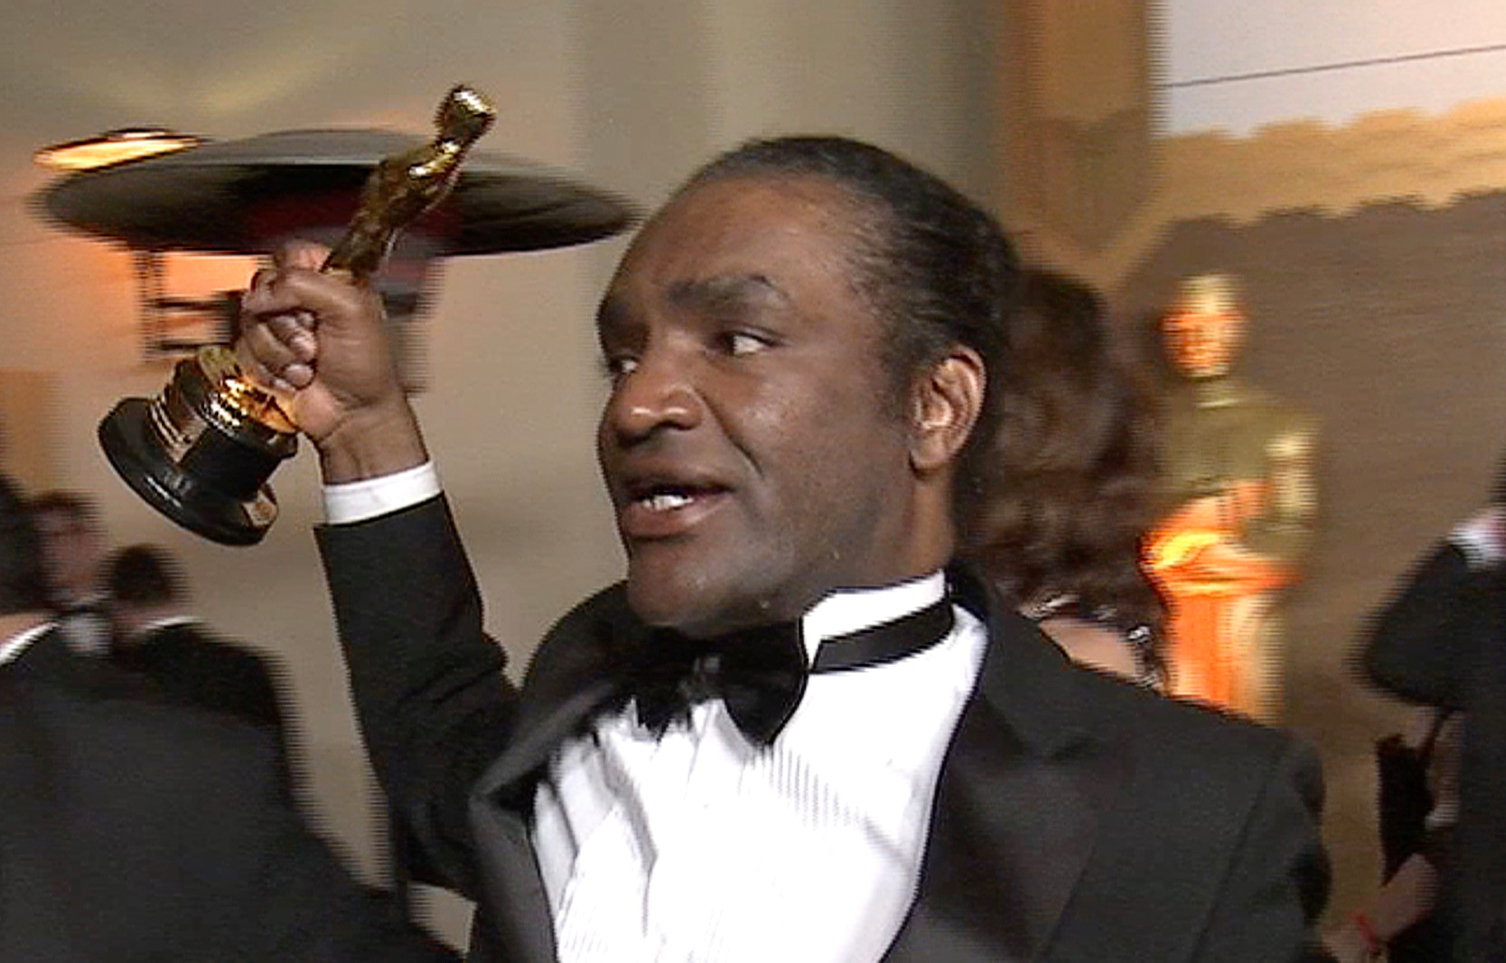 PHOTO: Terry Bryant, the man accused of stealing Frances McDormand's best actress Oscar at the lavish Governor's Ball party, is seen with the statuette in this still image from Reuters video in Hollywood, Calif., March 4, 2018. 